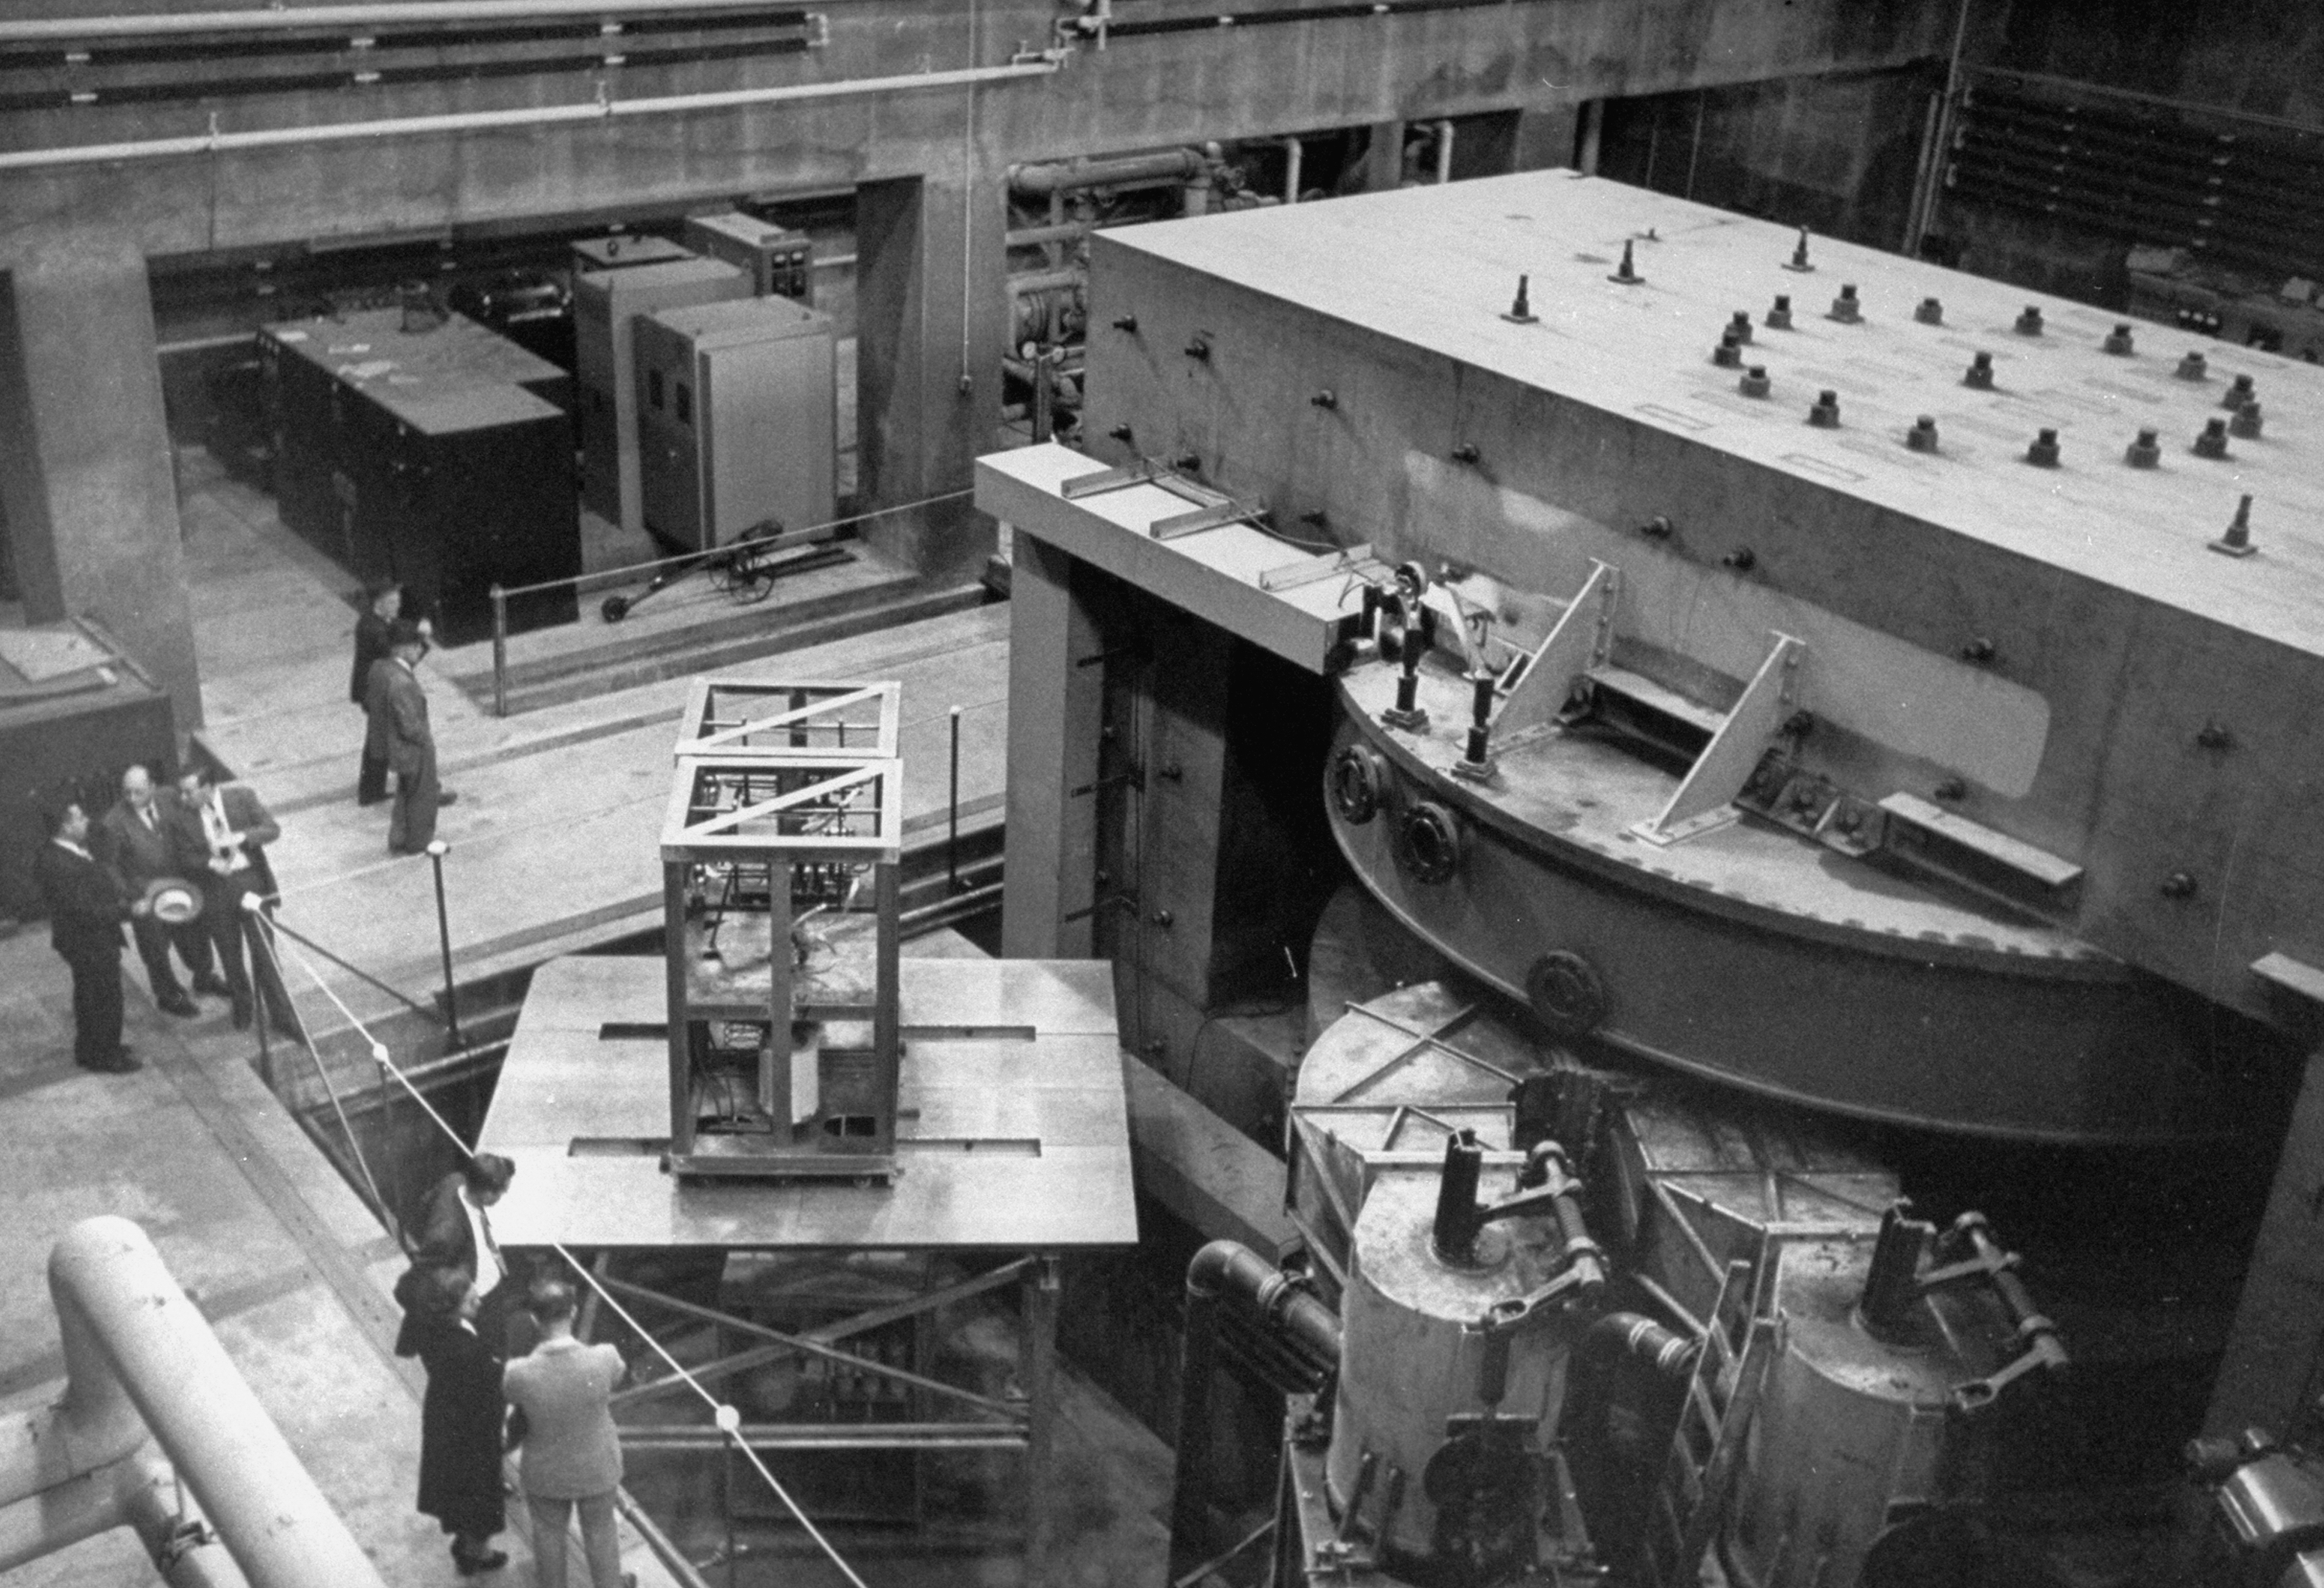 A cyclotron, capable of accelerating particles at 160,000 miles per second, at Columbia University's Nevis Lab, Irvington, New York, 1948.